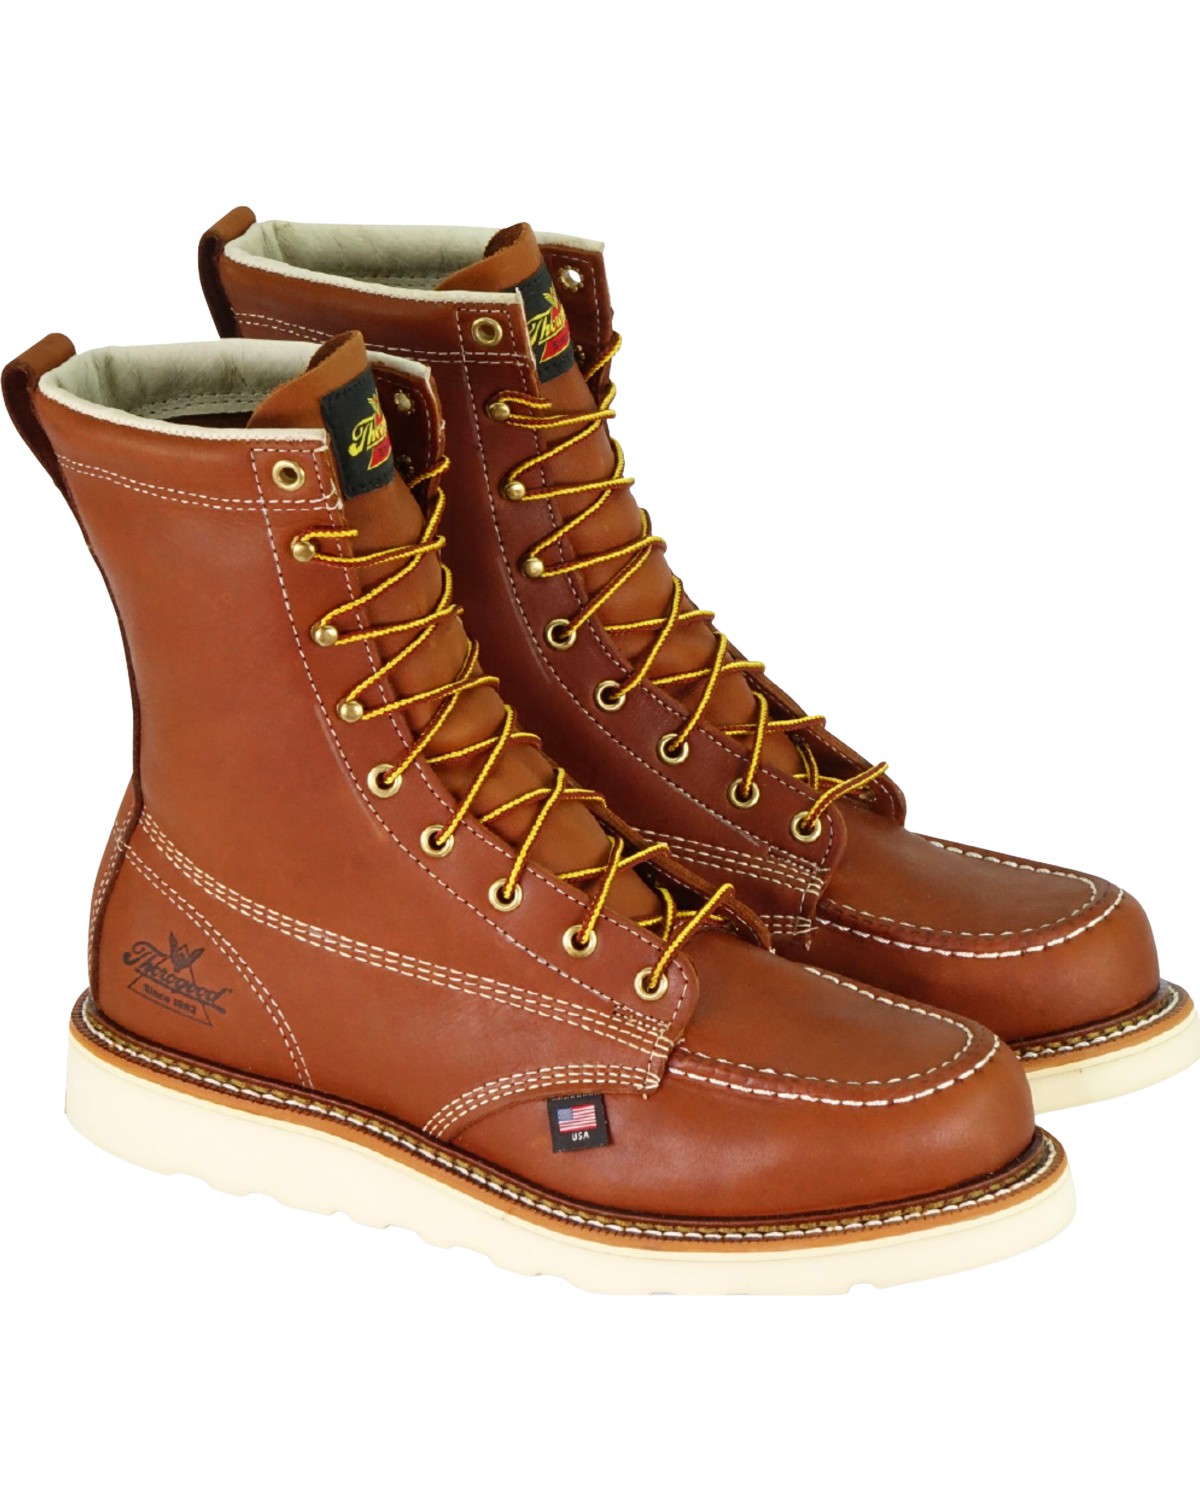 Thorogood Men's American Heritage 804-4208 8" Tobacco Oil-Tanned Moc Steel Toe Boot - image 1 of 7